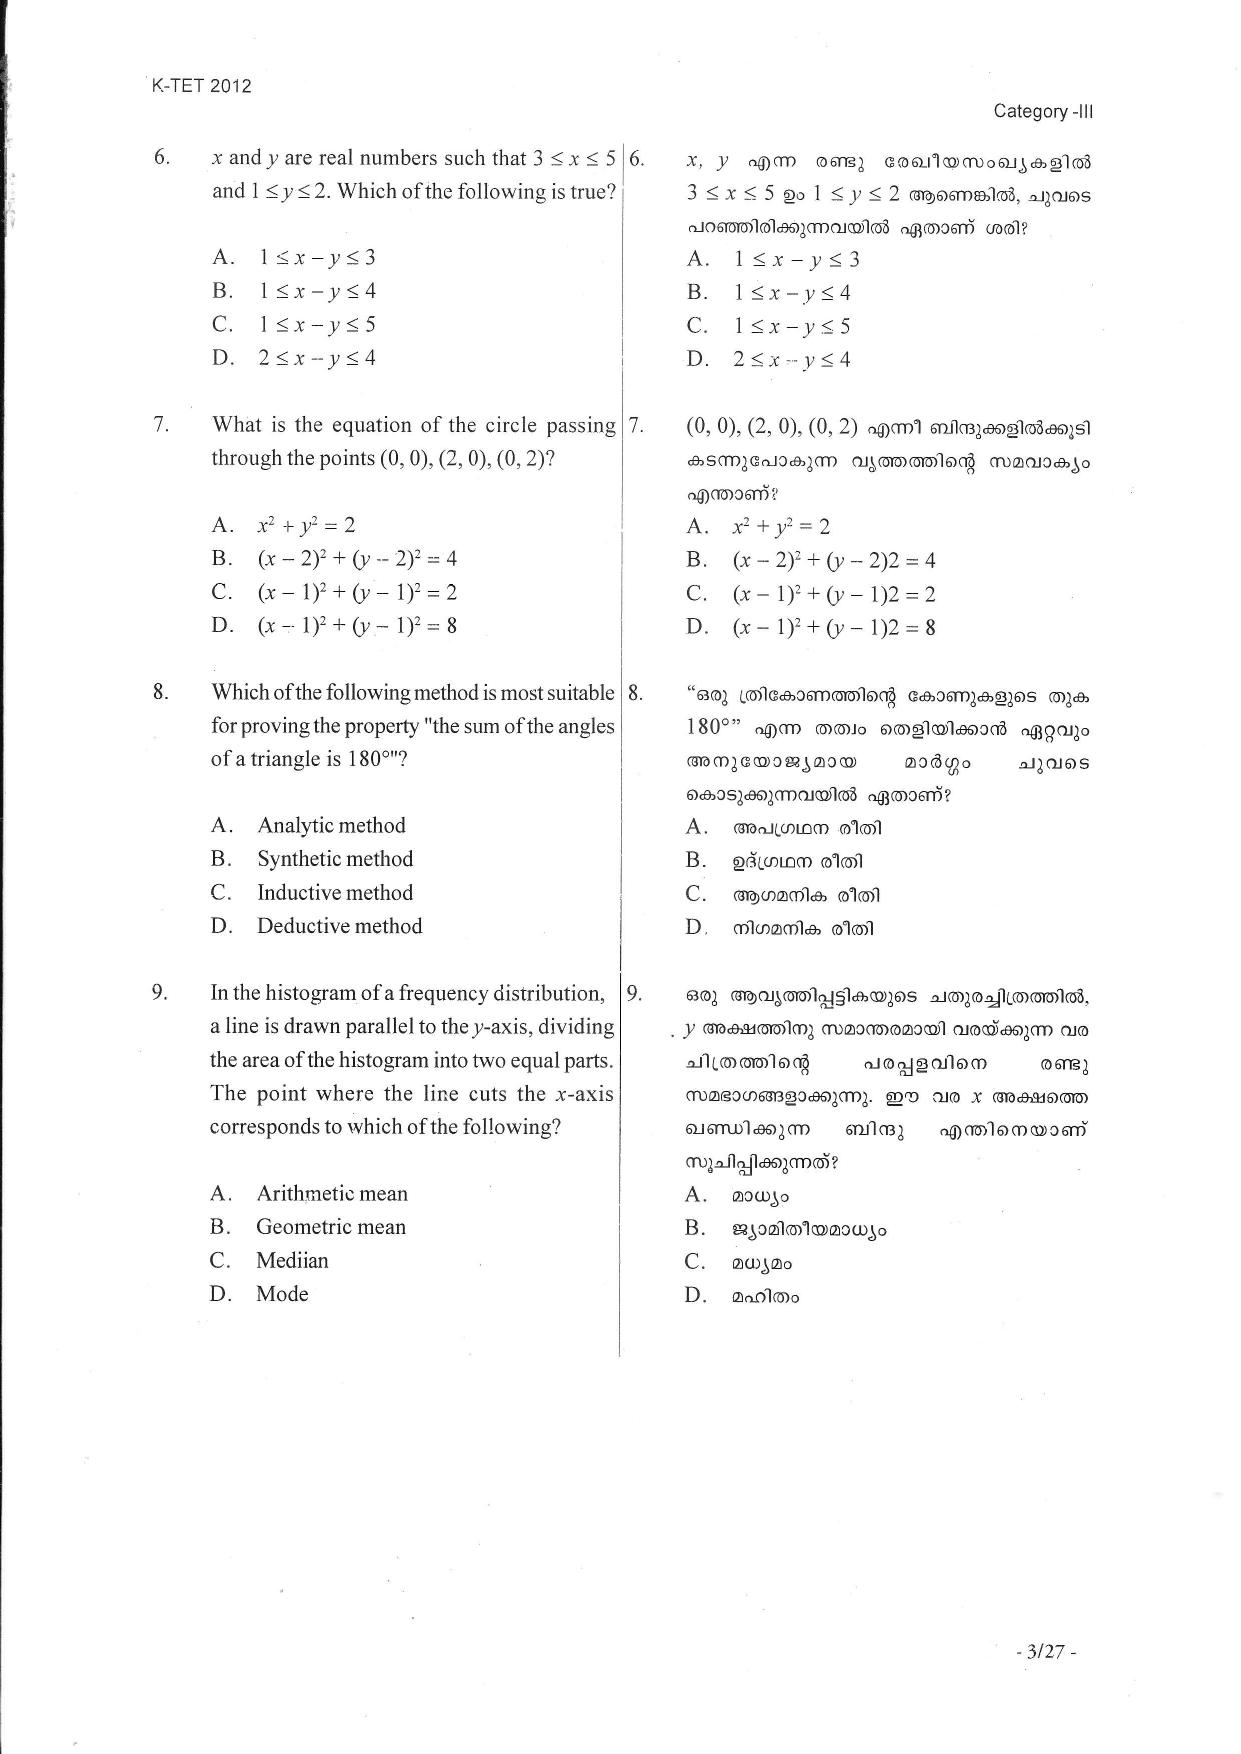 KTET Category III High School Teacher (8 to 10) Exam Previous Papers - Page 27